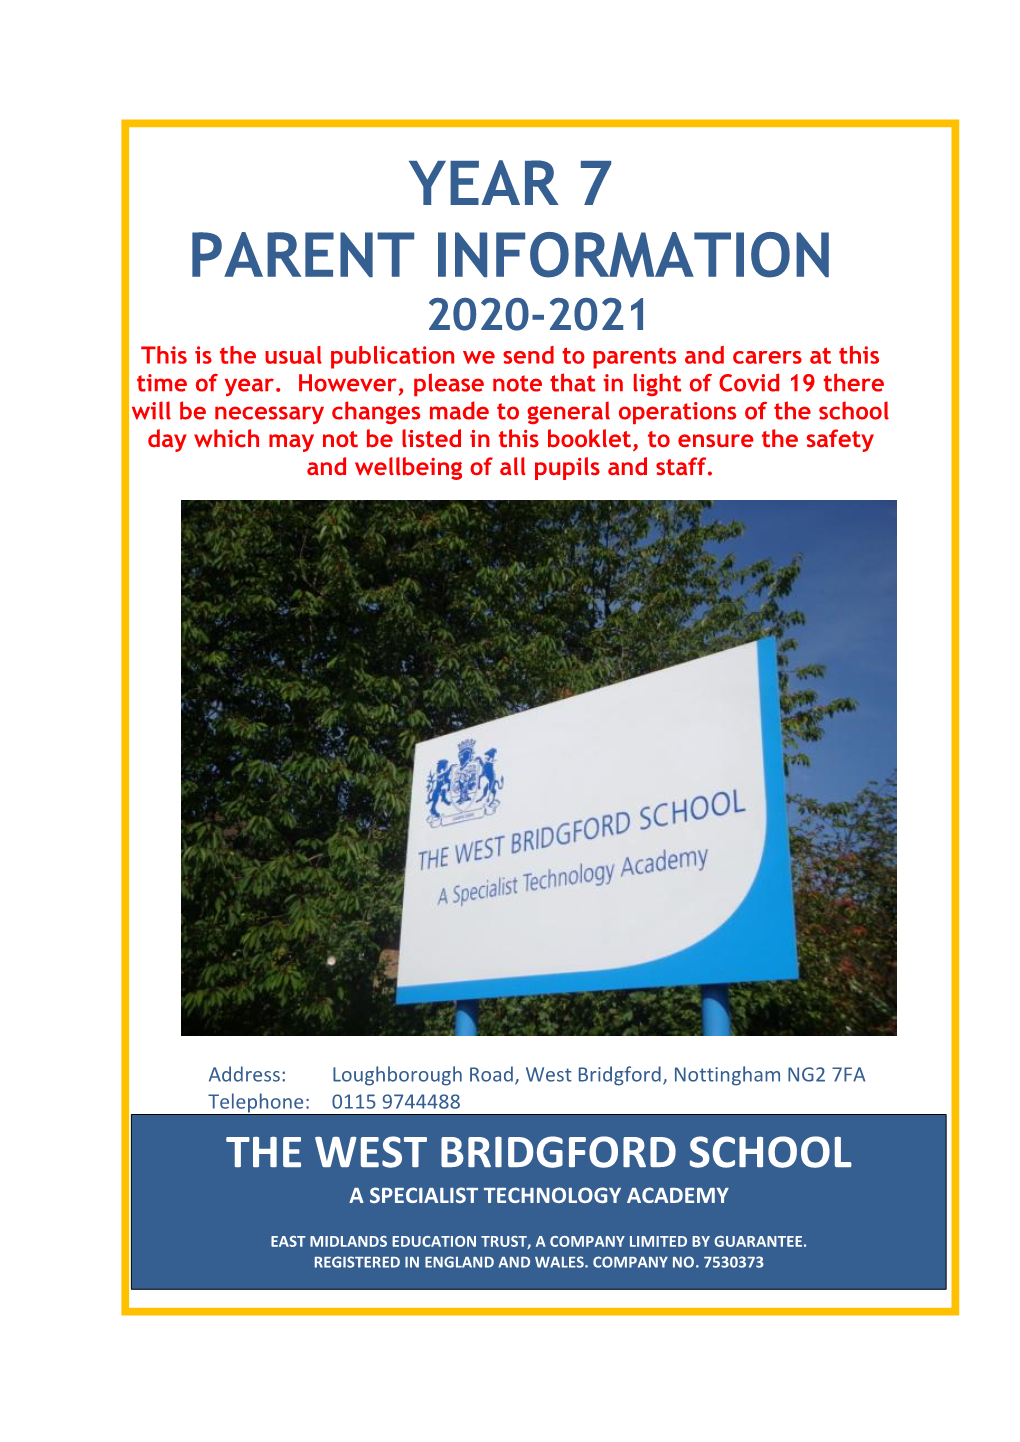 YEAR 7 PARENT INFORMATION 2020-2021 This Is the Usual Publication We Send to Parents and Carers at This Time of Year